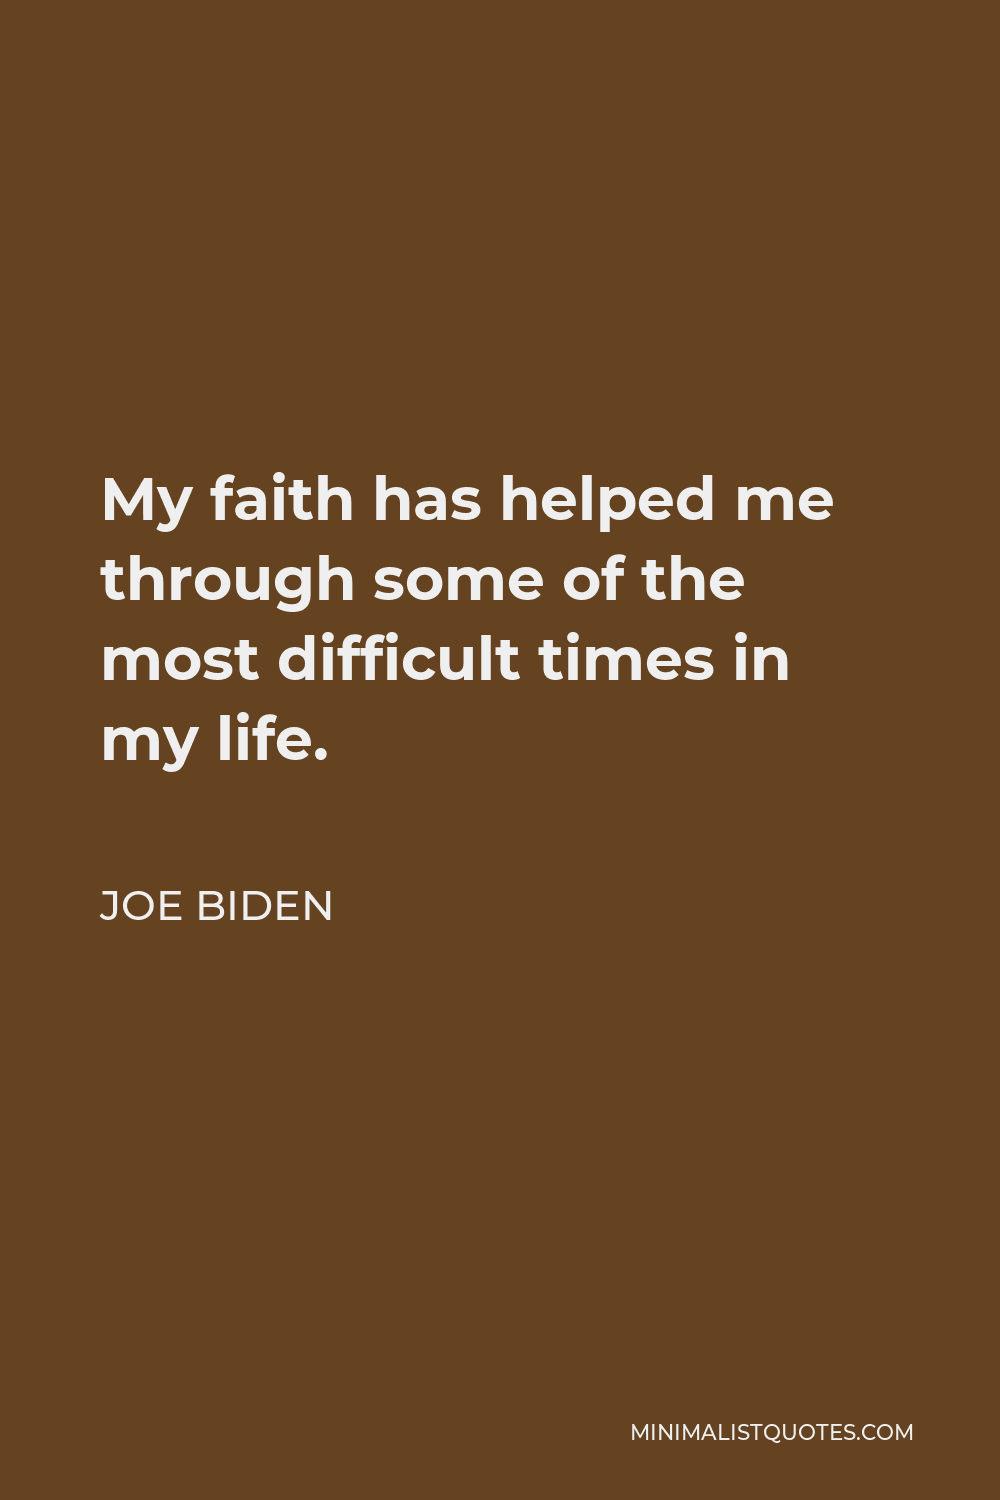 Joe Biden Quote - My faith has helped me through some of the most difficult times in my life.